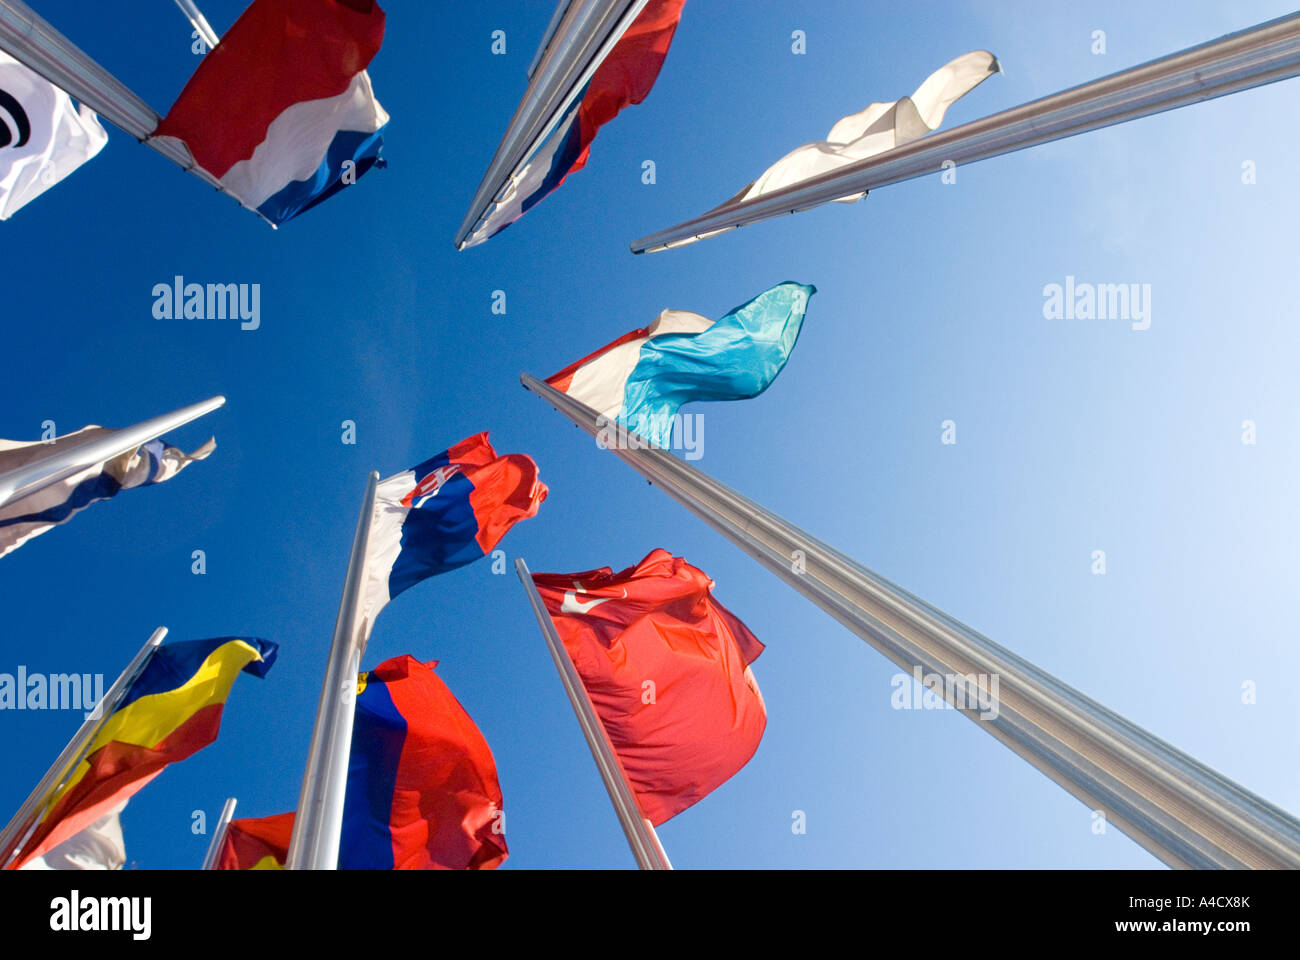 many european Flags standing together in blue sky Stock Photo